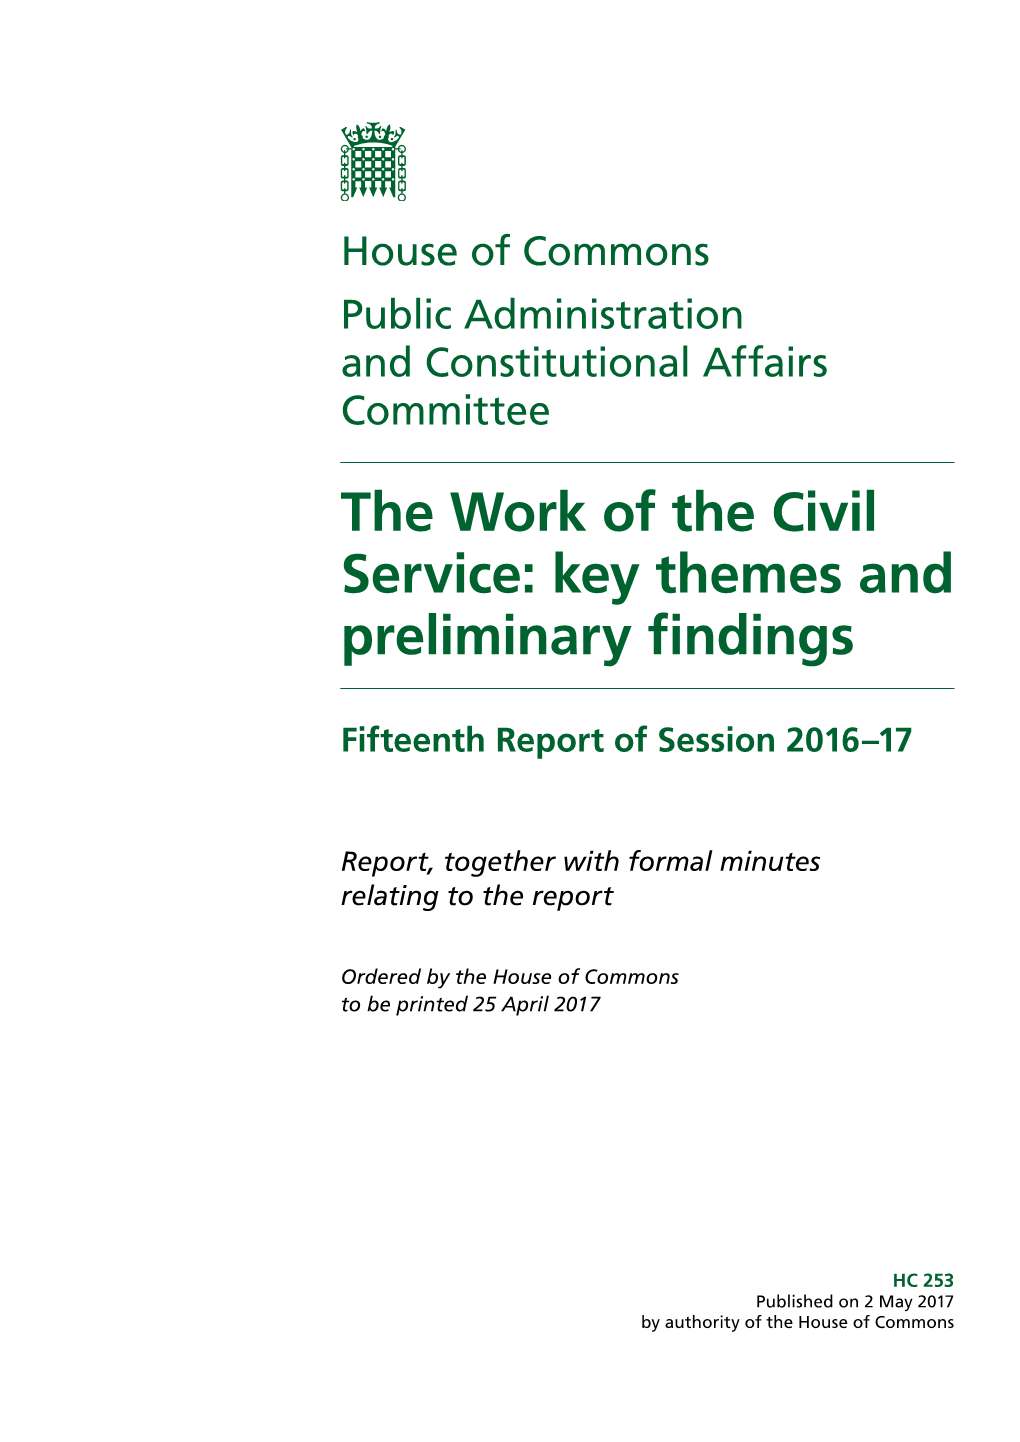 The Work of the Civil Service: Key Themes and Preliminary Findings